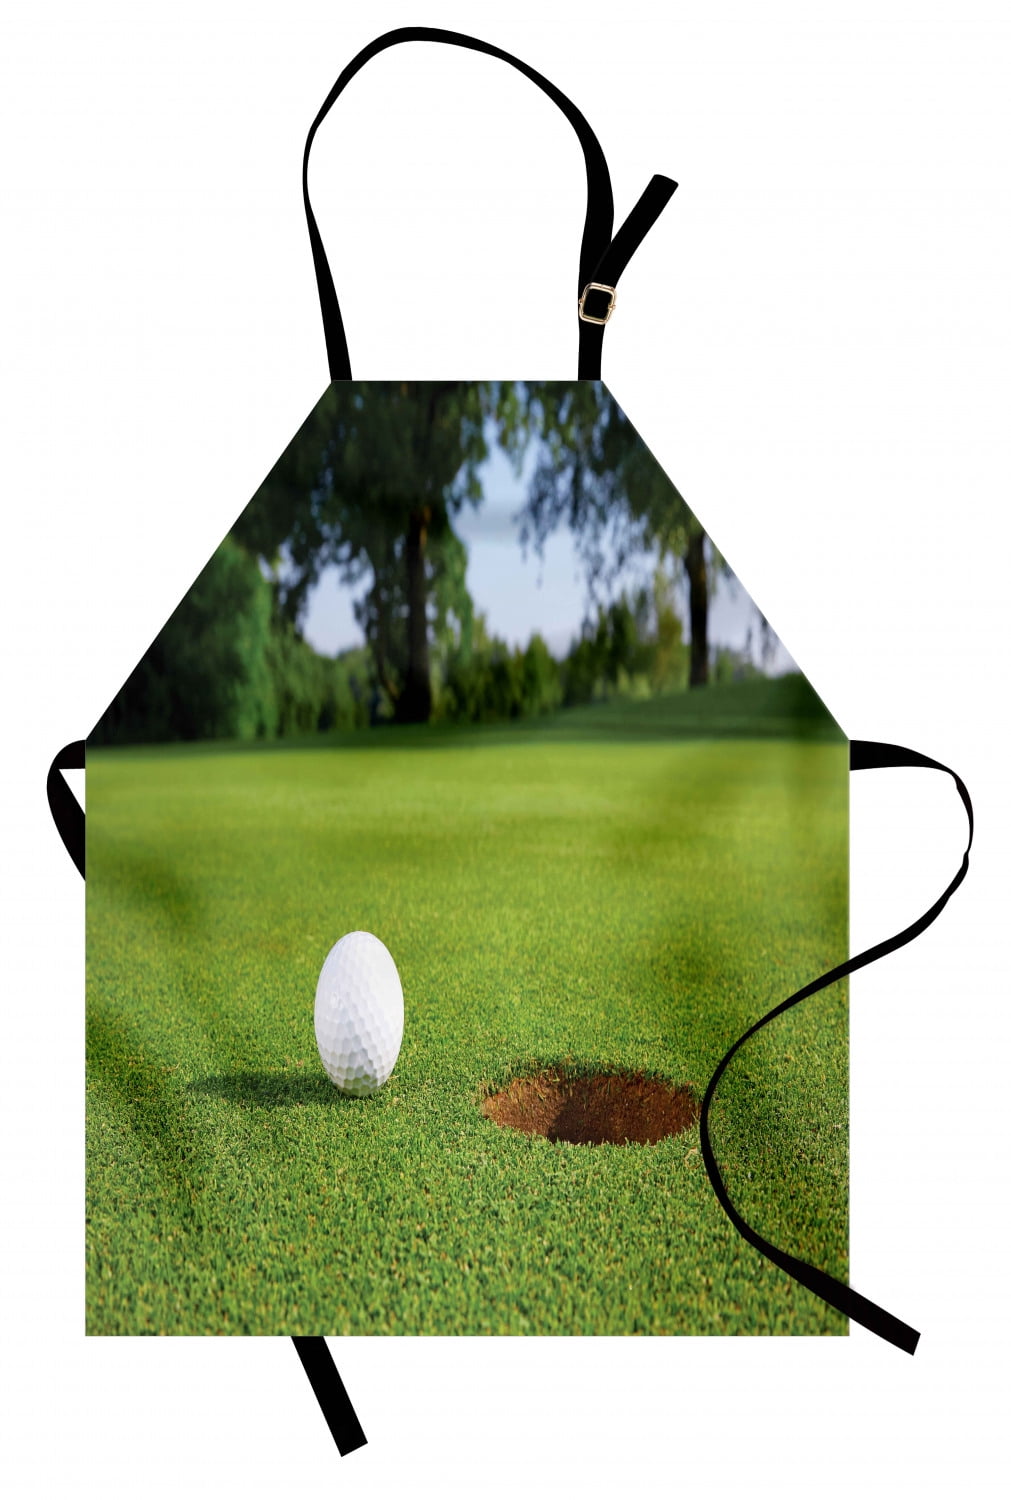 Golf Apron, Silhouette of Men Playing Golf Game Champion Modern Abstract  Graphic Art, Unisex Kitchen Bib with Adjustable Neck for Cooking Gardening